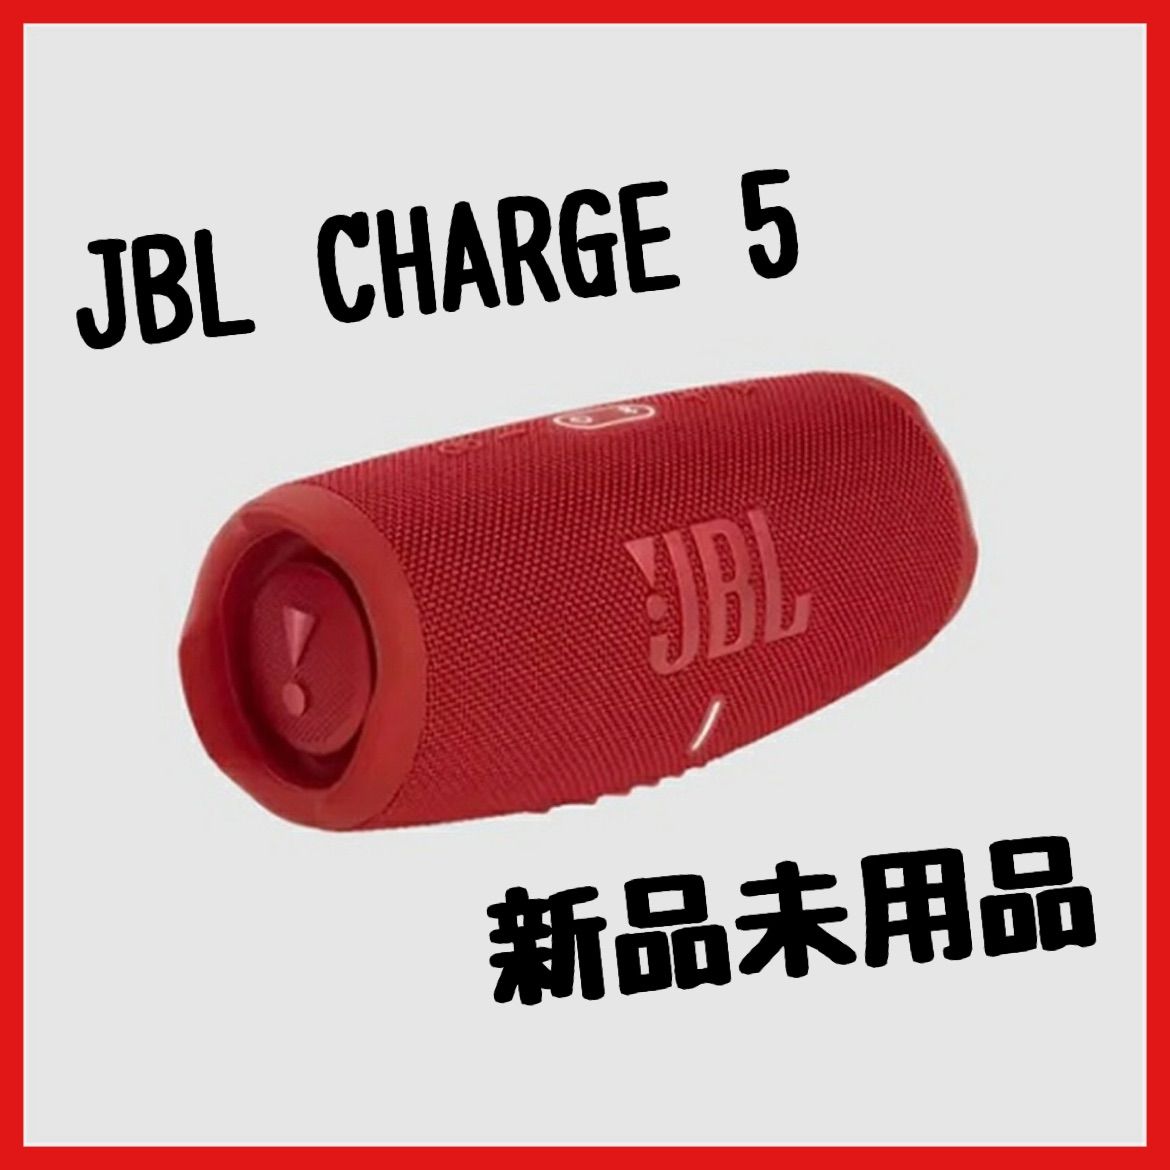 JBL CHARGE 5 チャージ5 charge5 レッド-